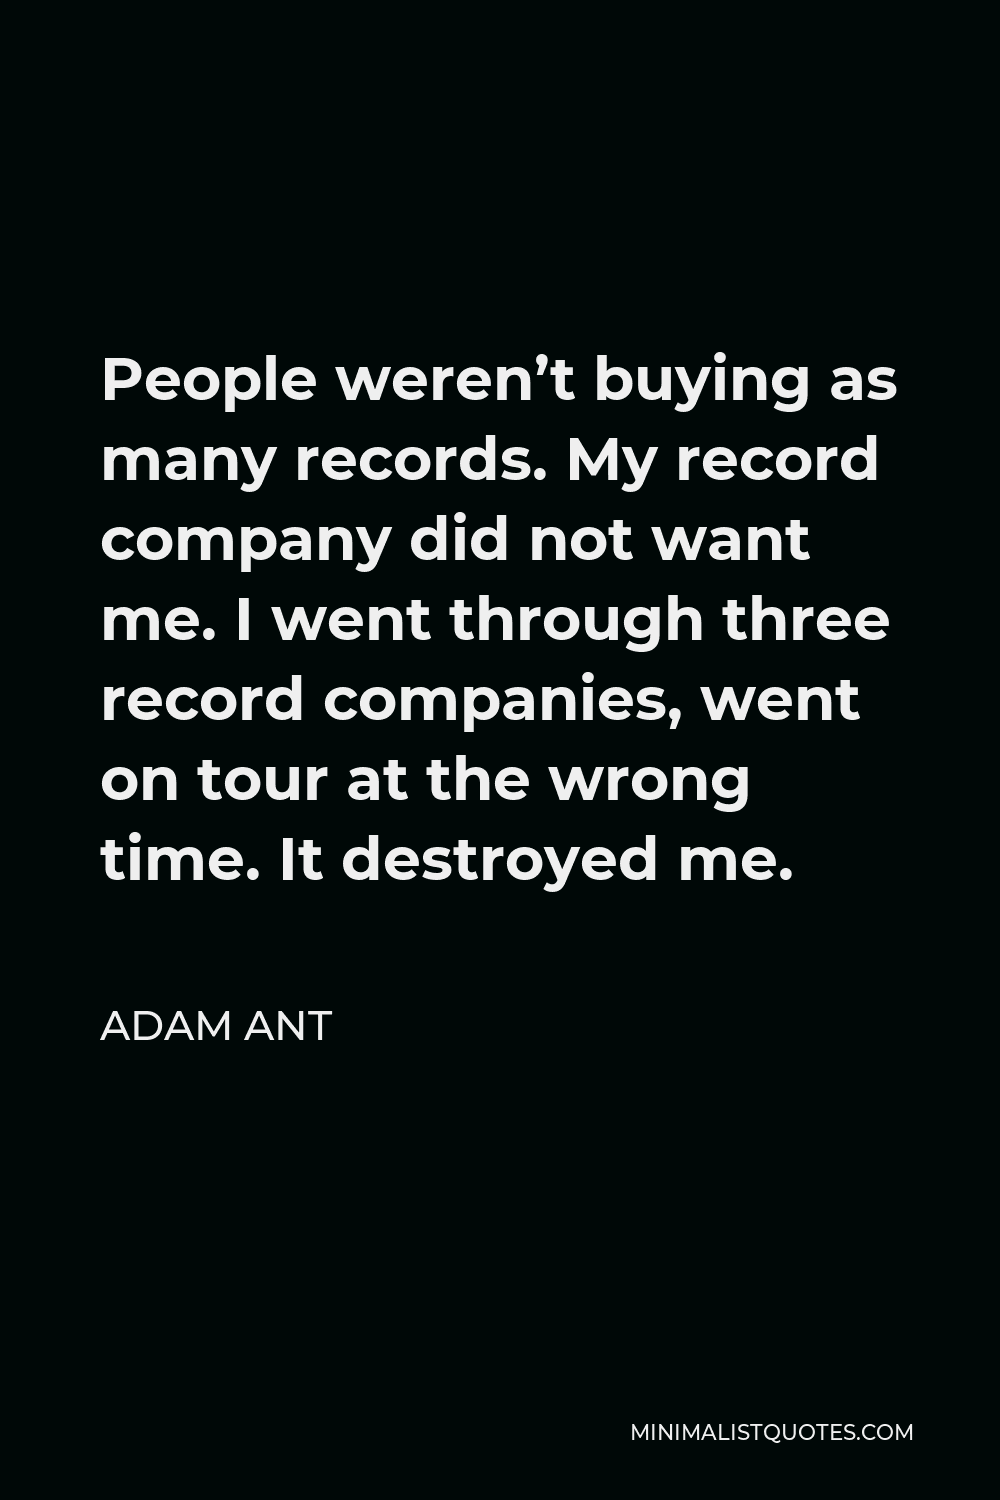 Adam Ant Quote - People weren’t buying as many records. My record company did not want me. I went through three record companies, went on tour at the wrong time. It destroyed me.